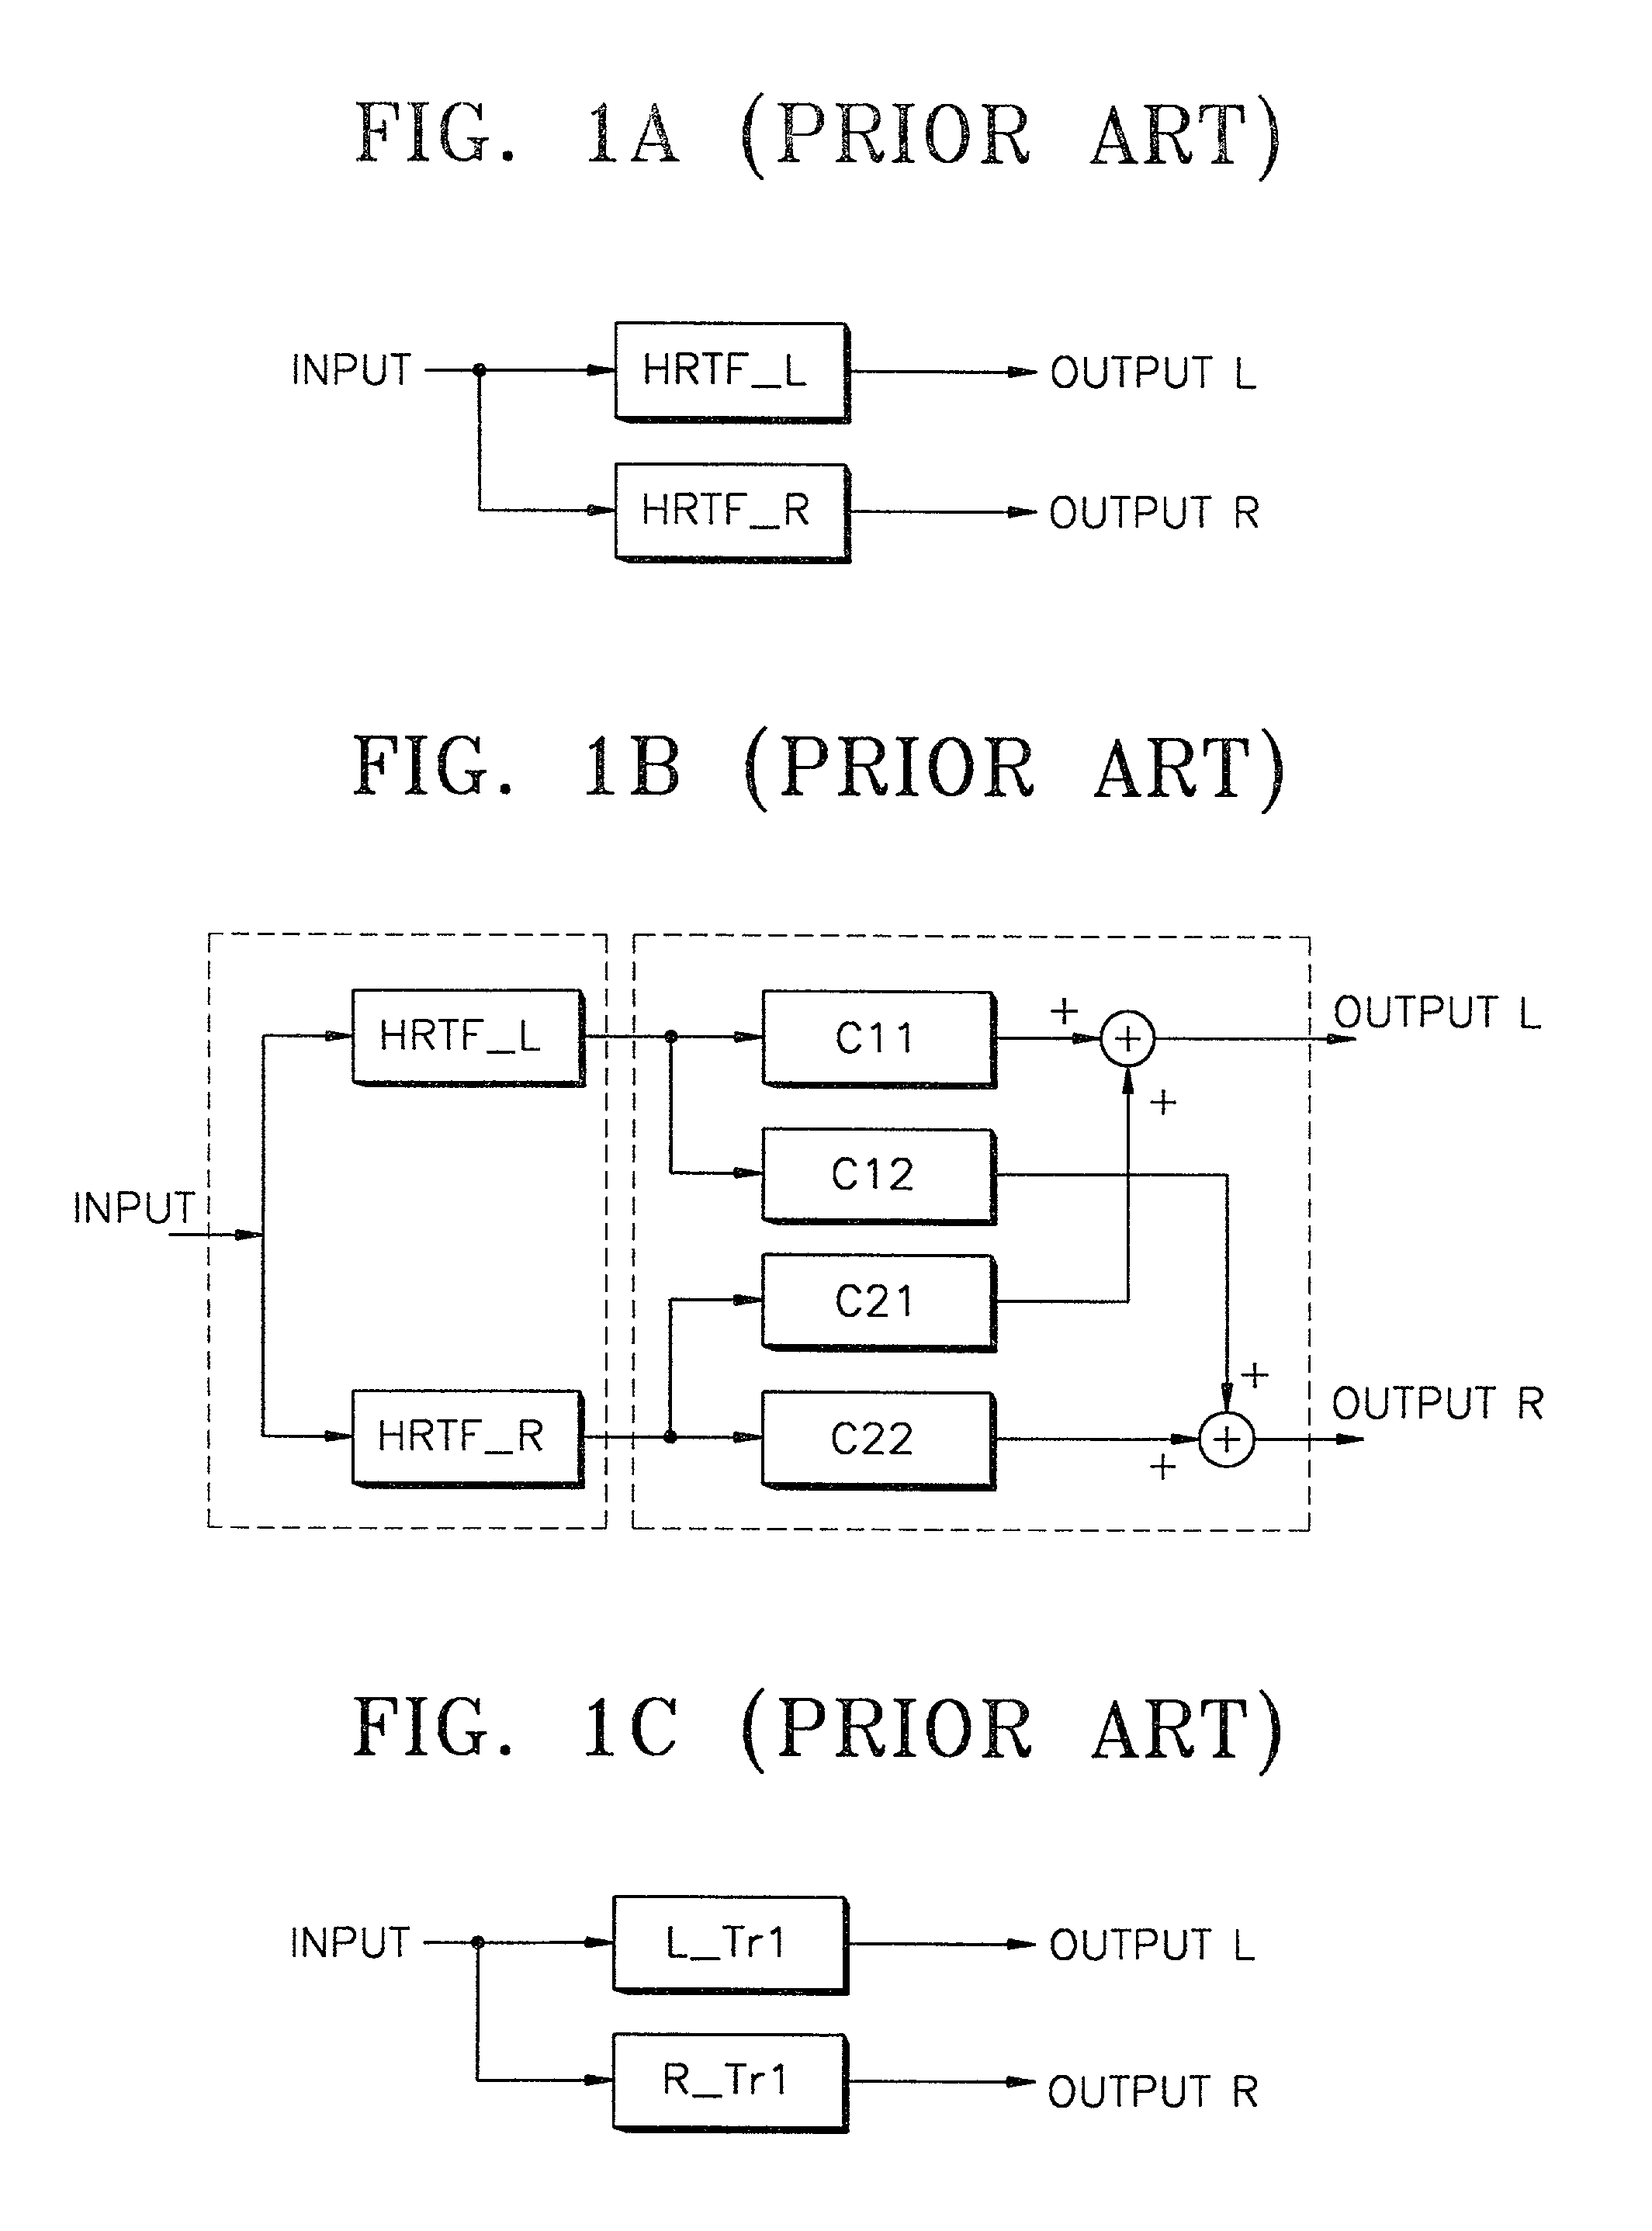 Multi-channel audio reproduction apparatus and method for loudspeaker sound reproduction using position adjustable virtual sound images